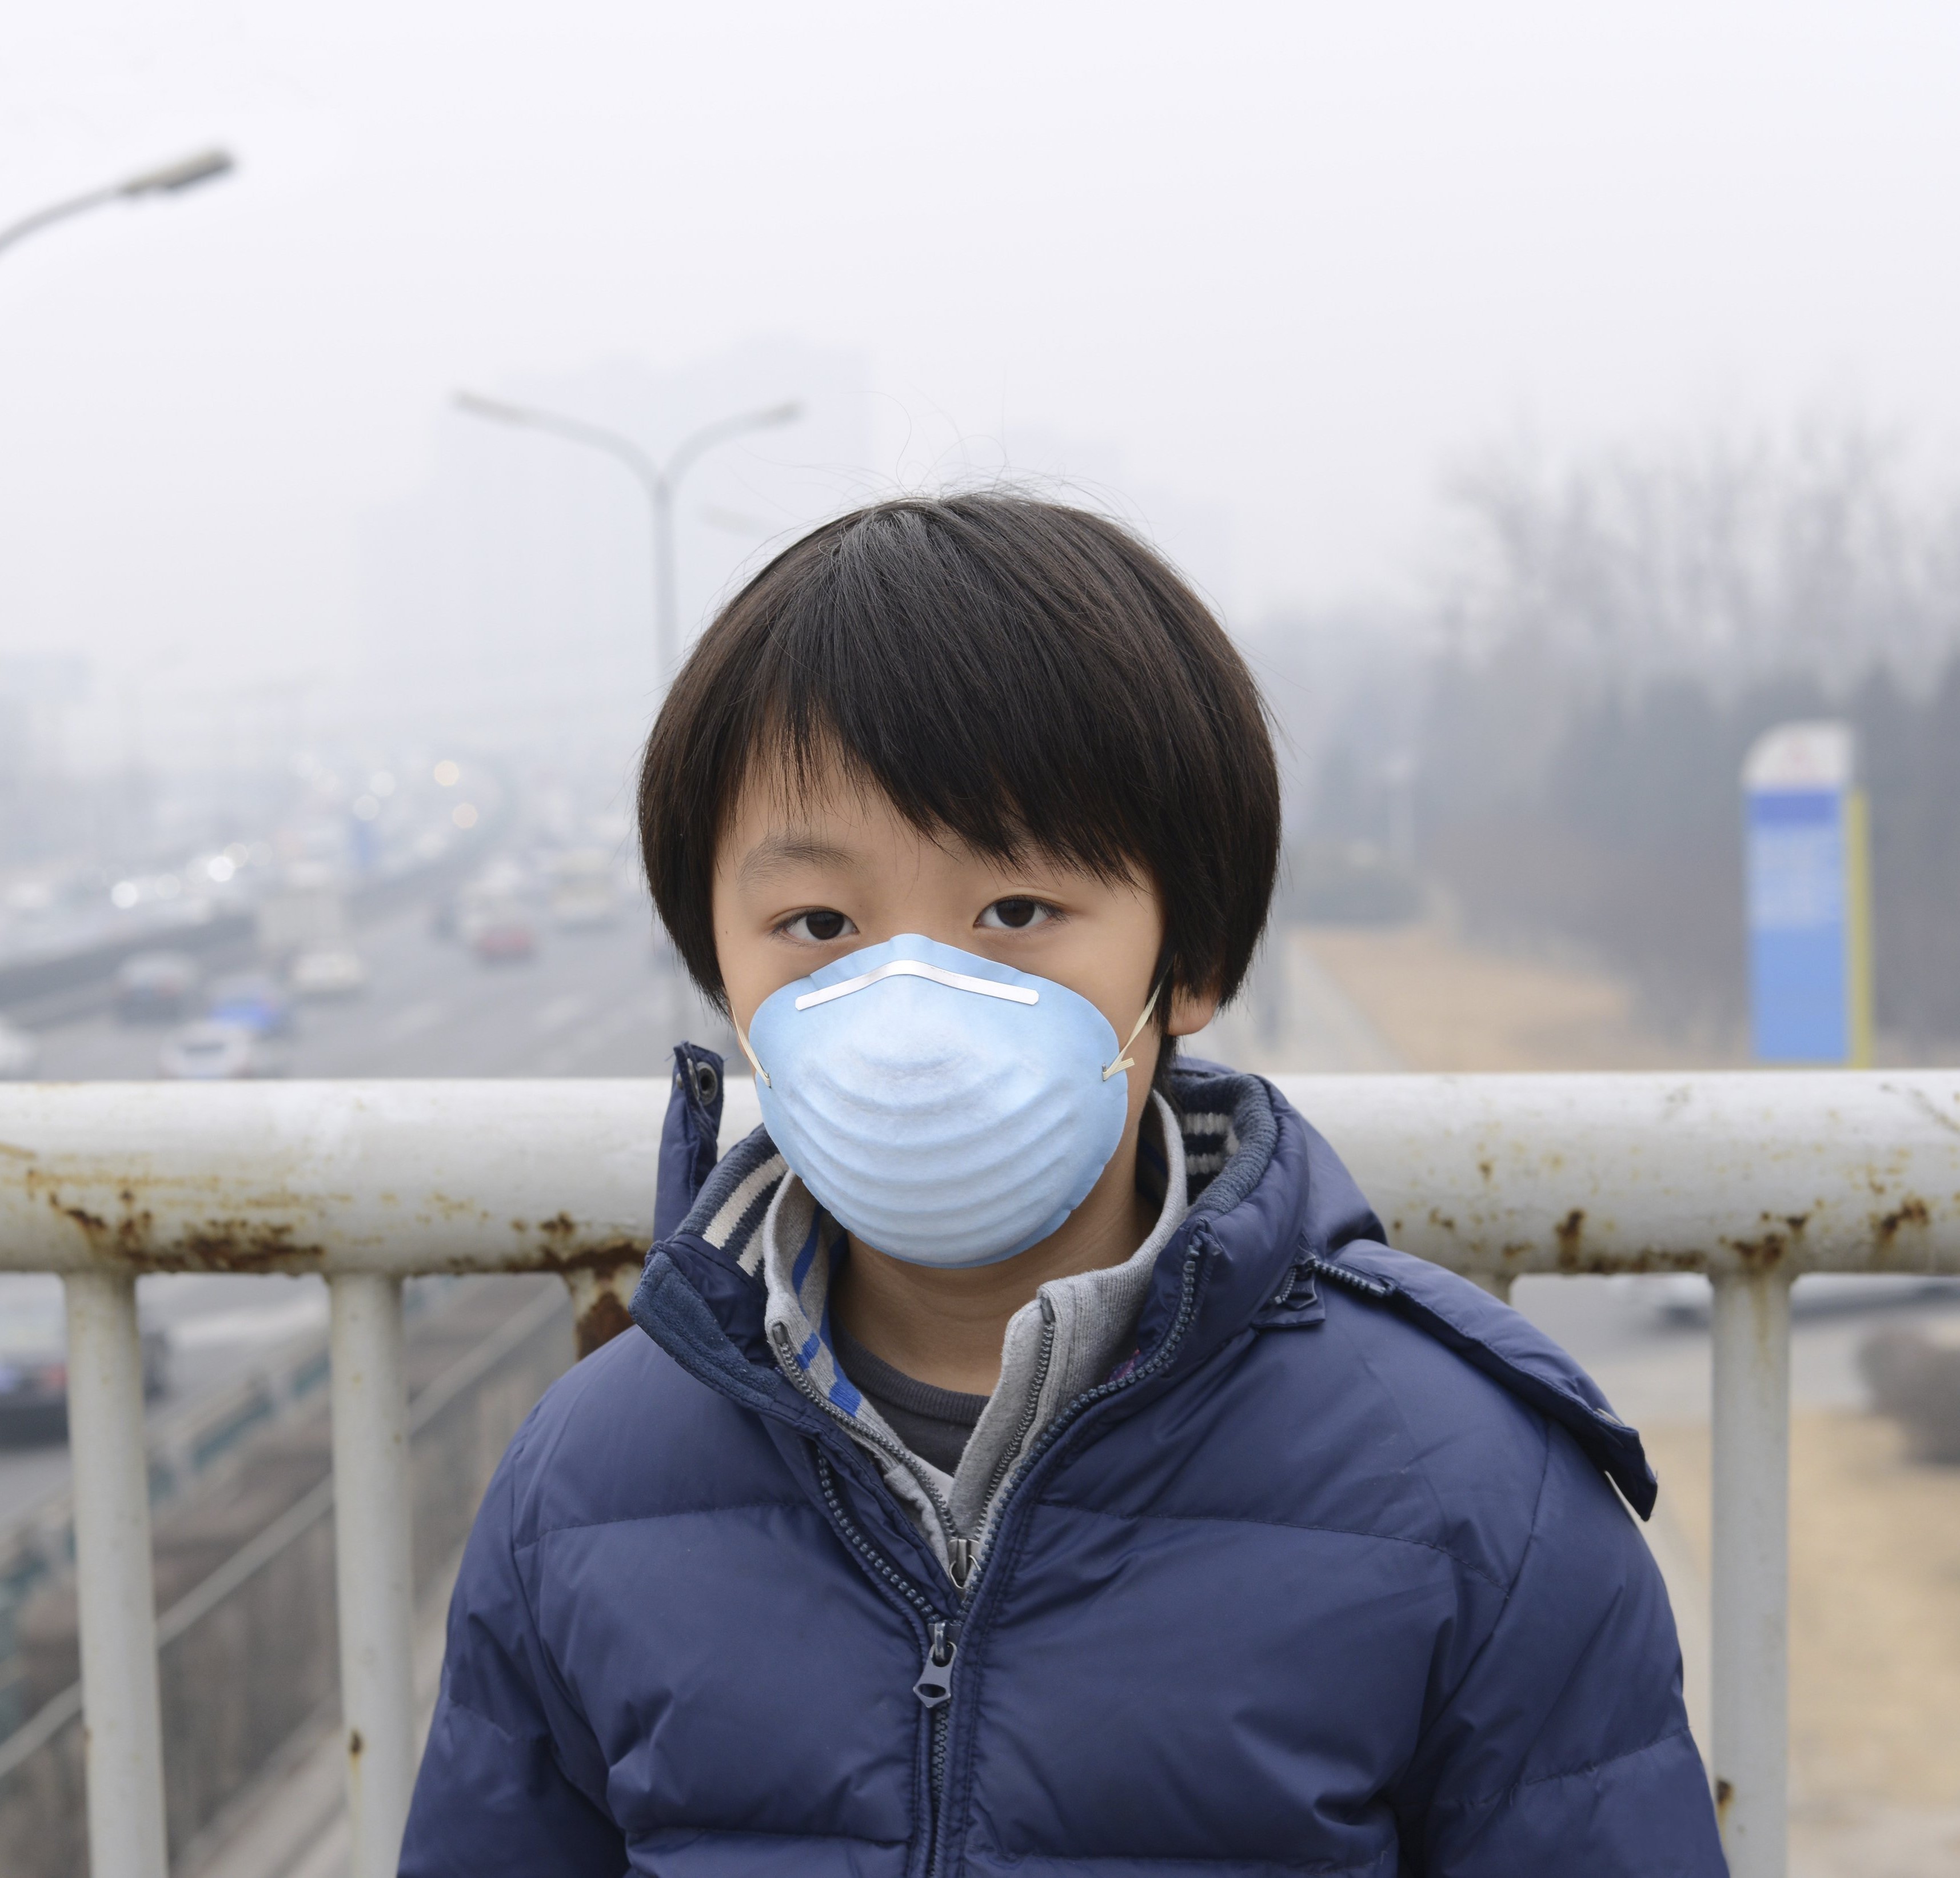 Boy wearing mask in China with polluted air behind